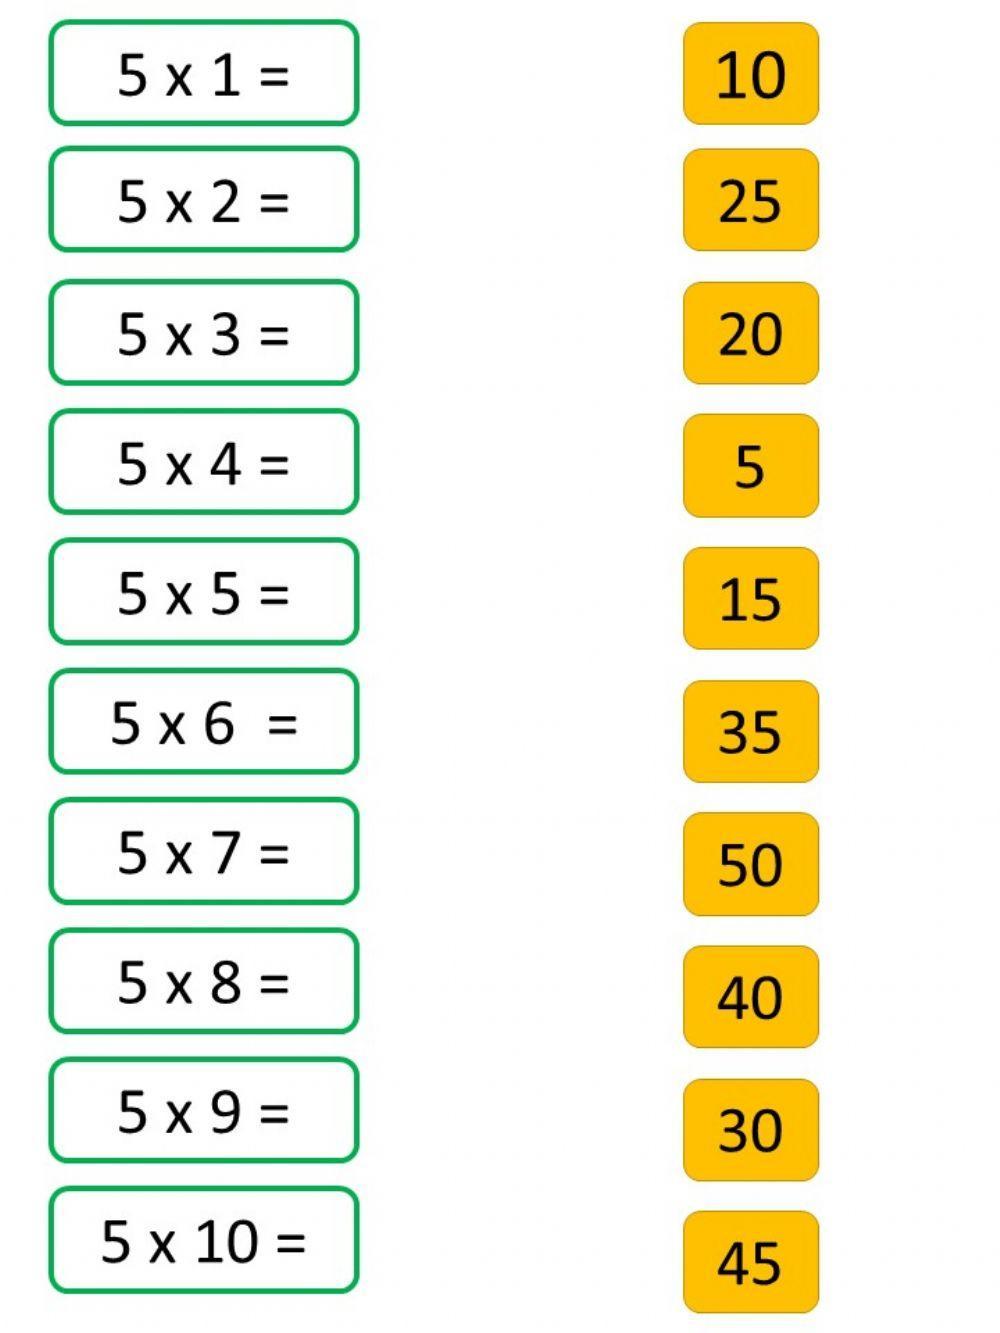 5 times tables